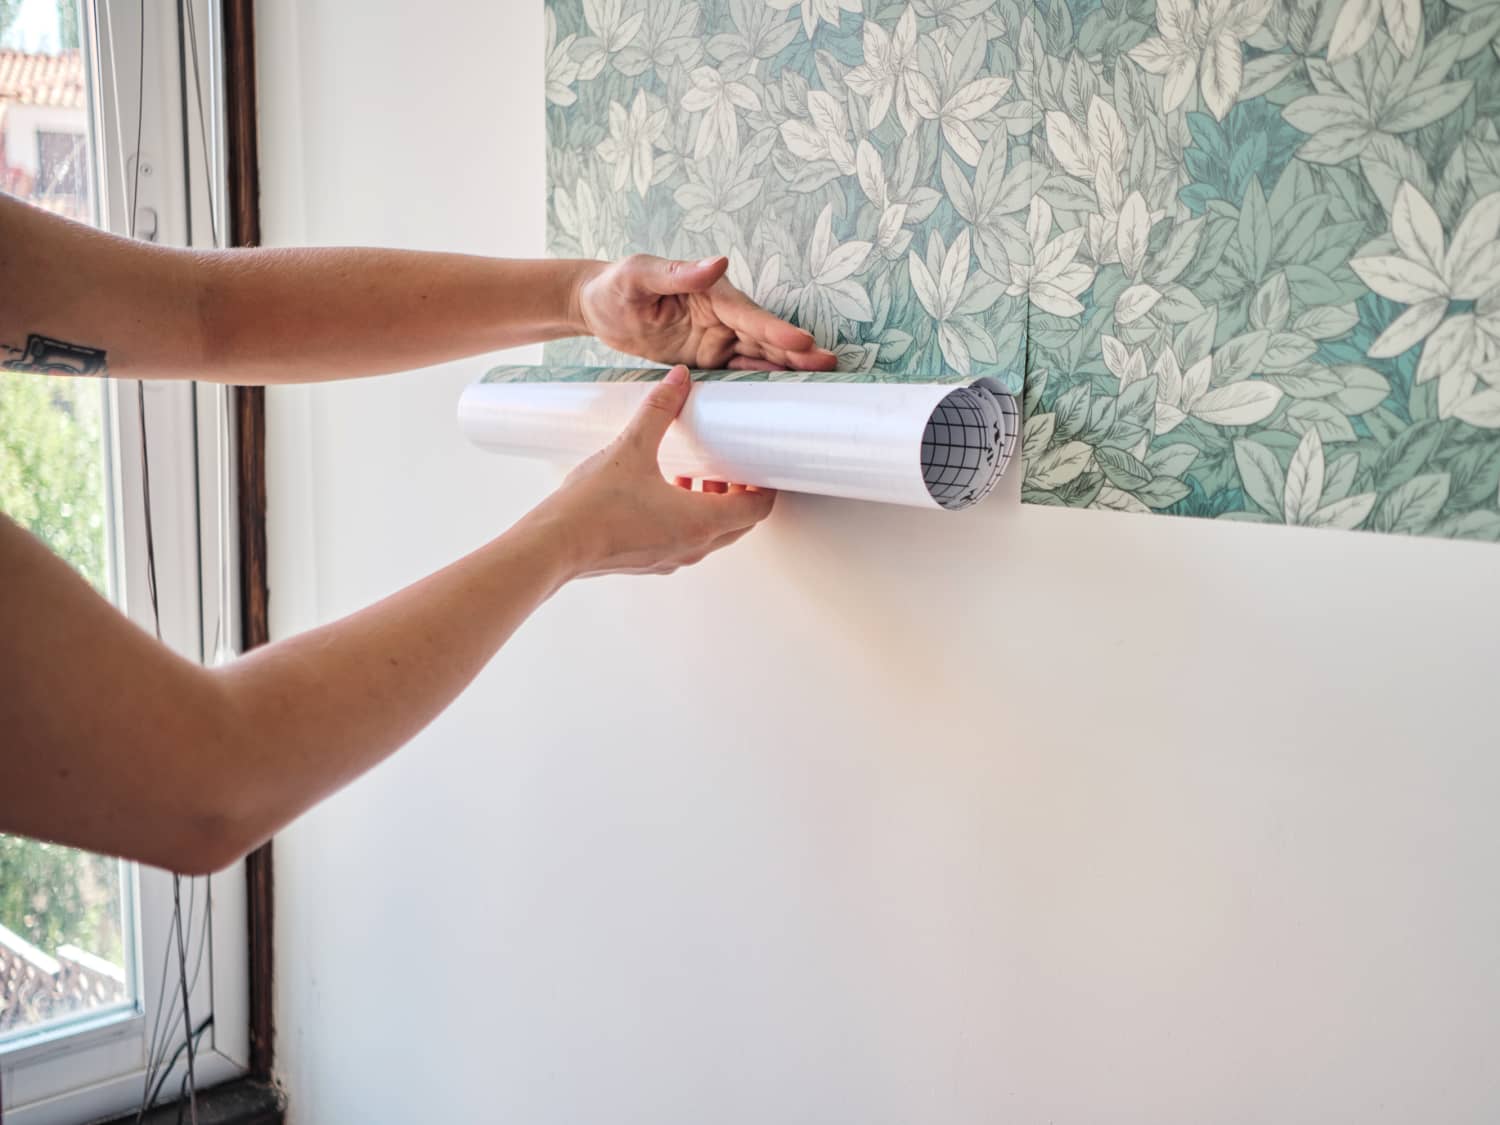 Yes… you can put #peelandstickwallpaper on textured walls! If you have, Peel And Stick Wall Paper